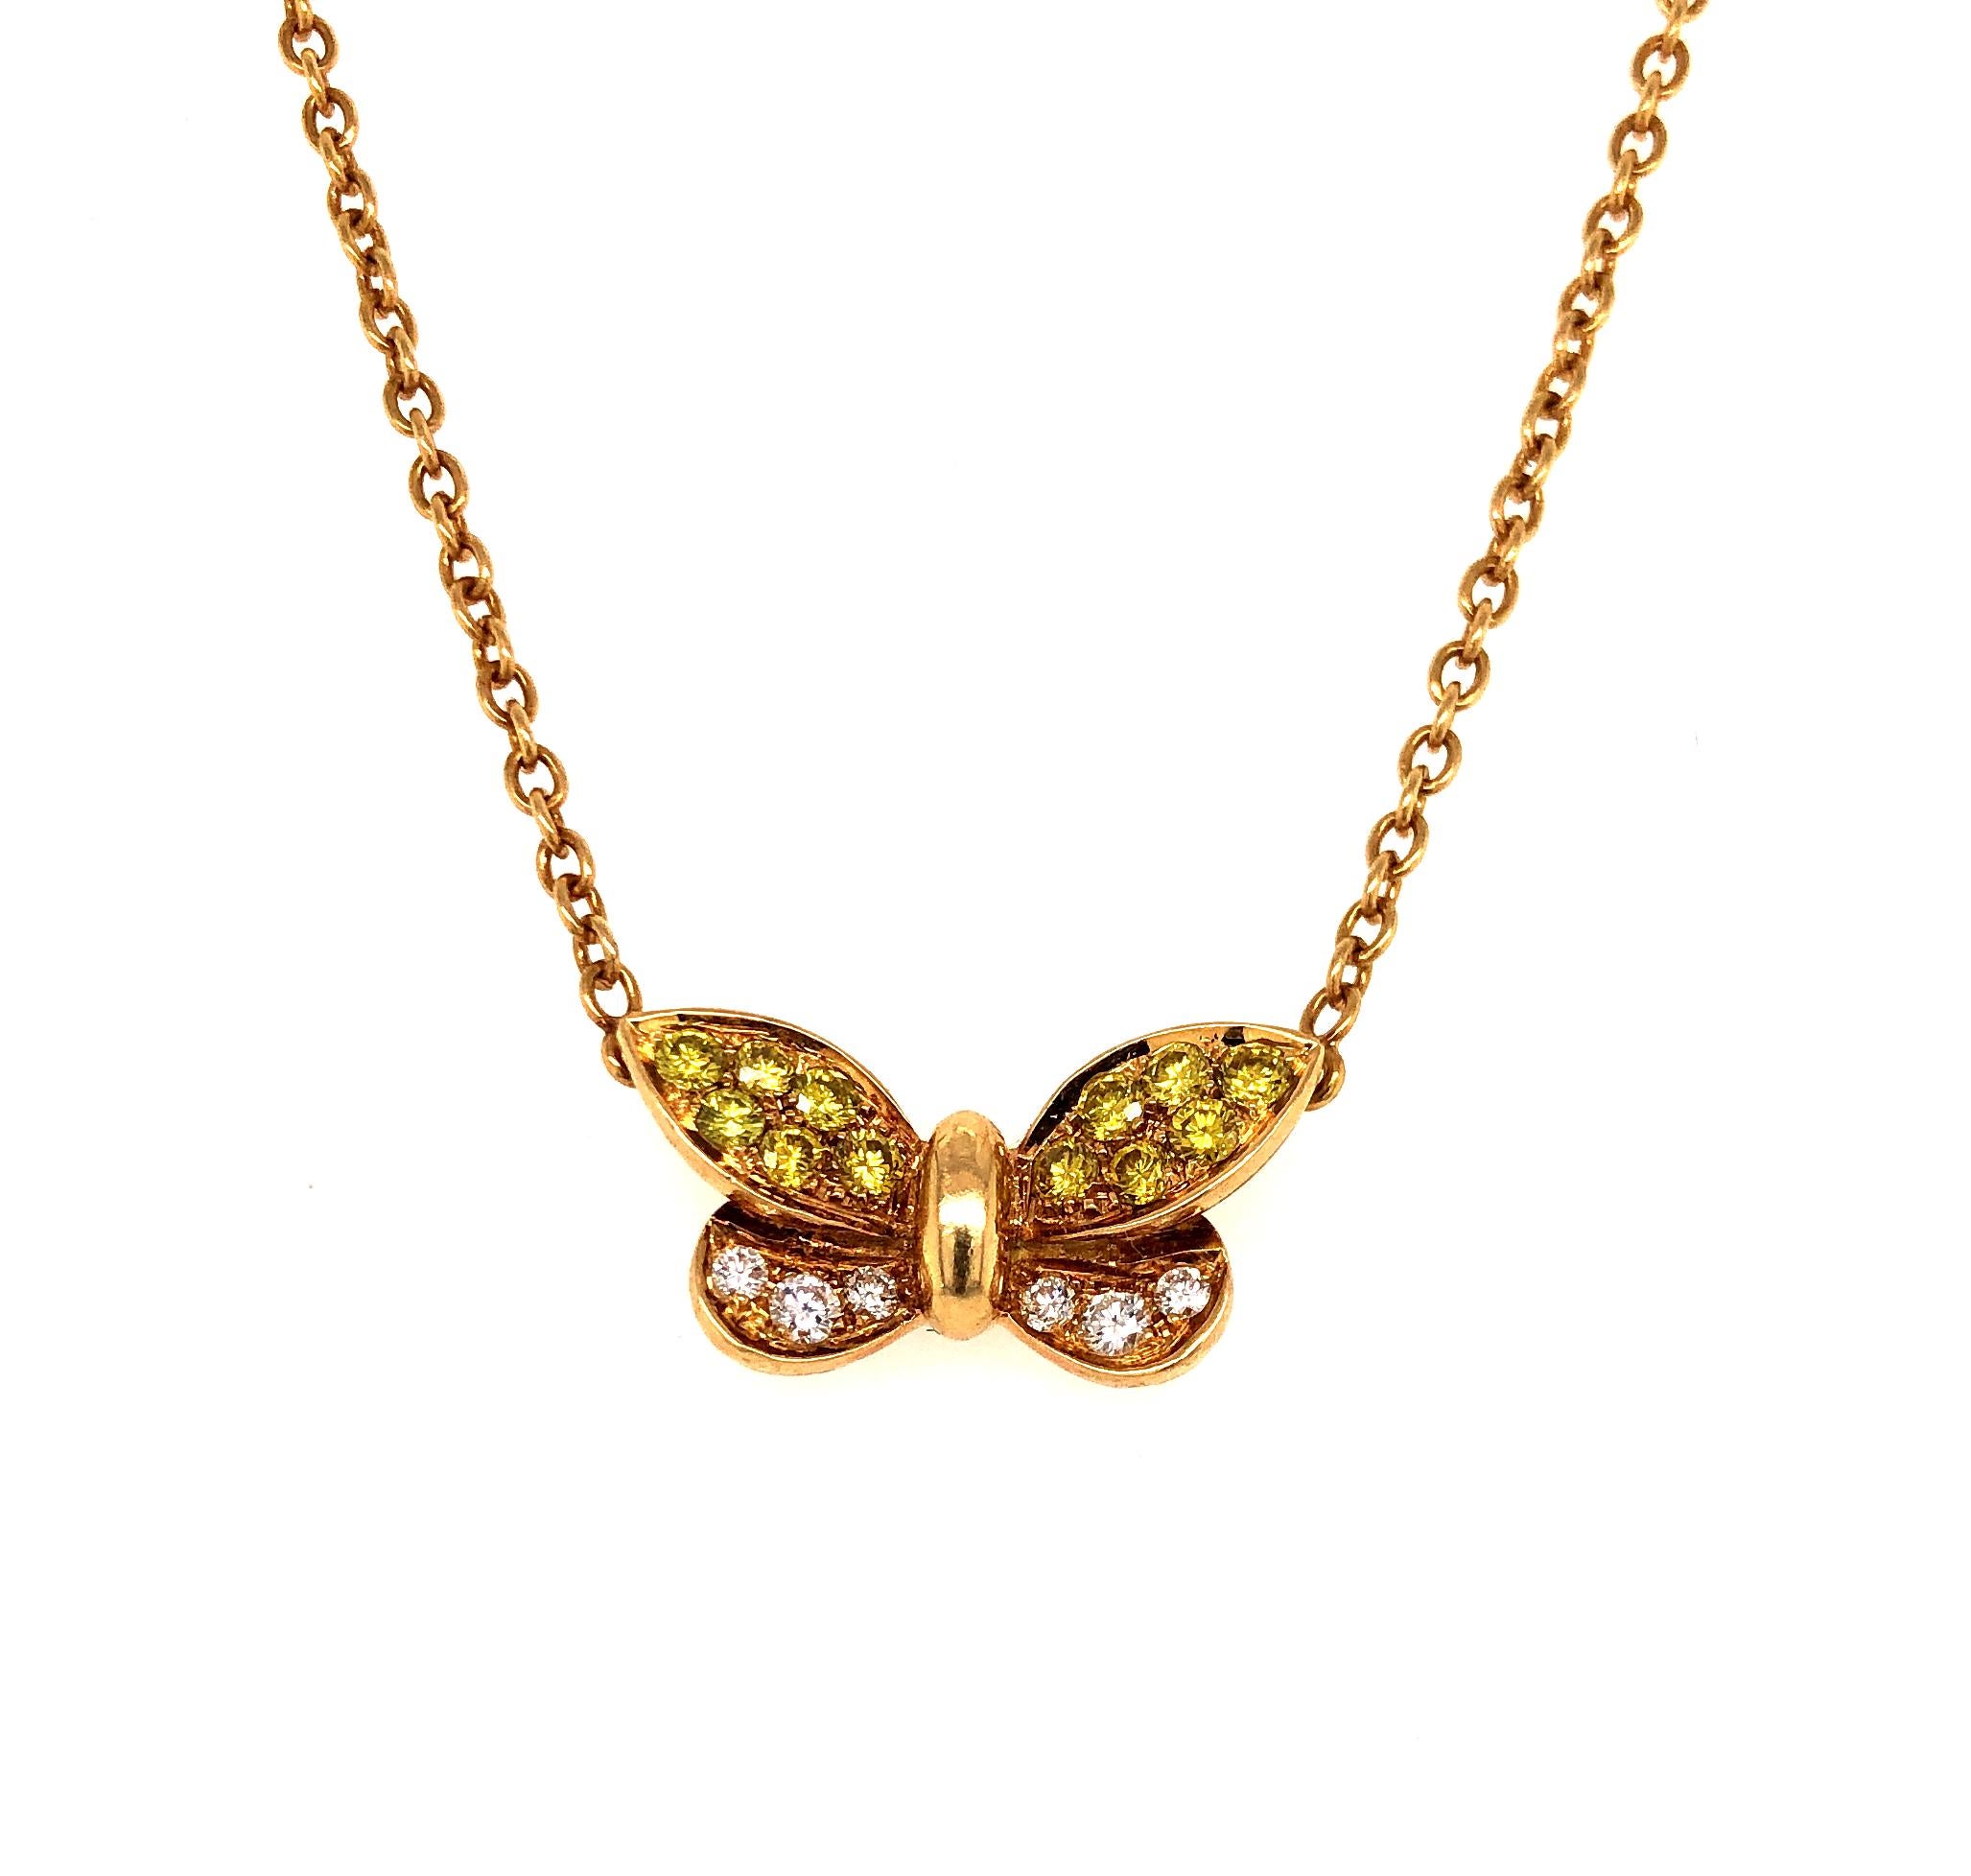 Round Cut Fancy Yellow and White Diamond Butterfly Necklace 18 Karat Gold 1.01 Carat